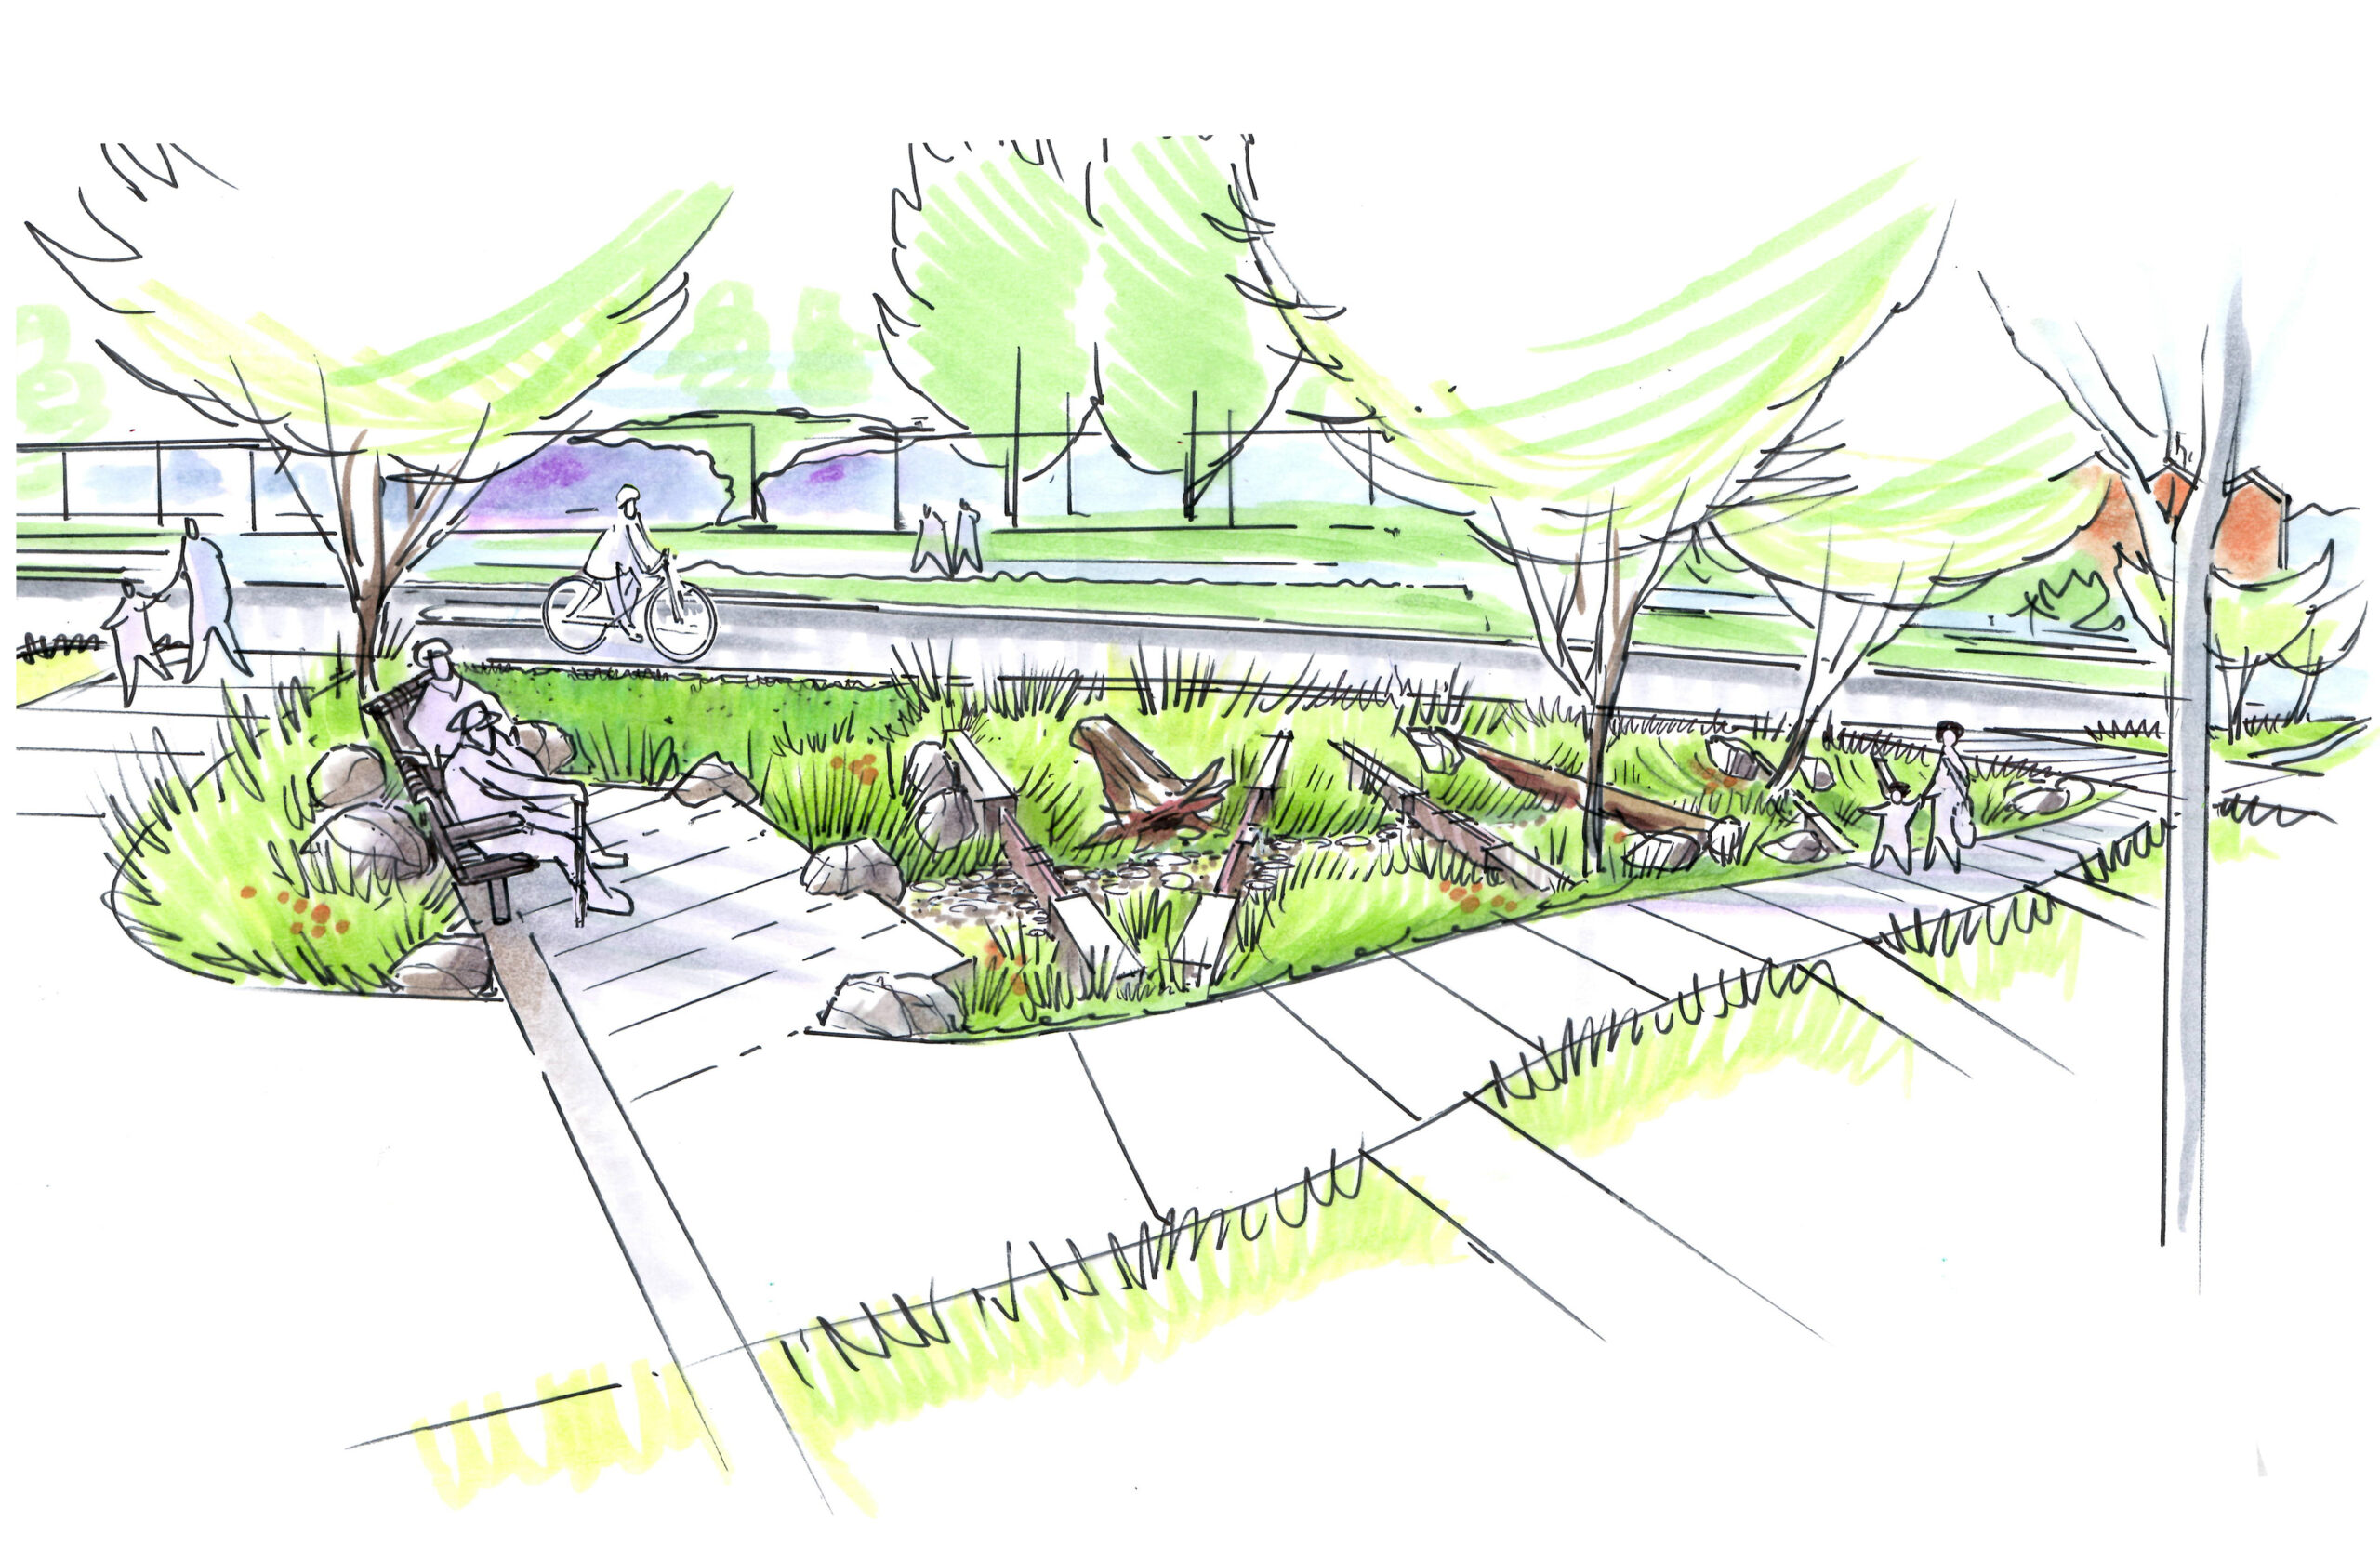 Illustration of the rainway showing bikers, gardens, and people sitting on benches